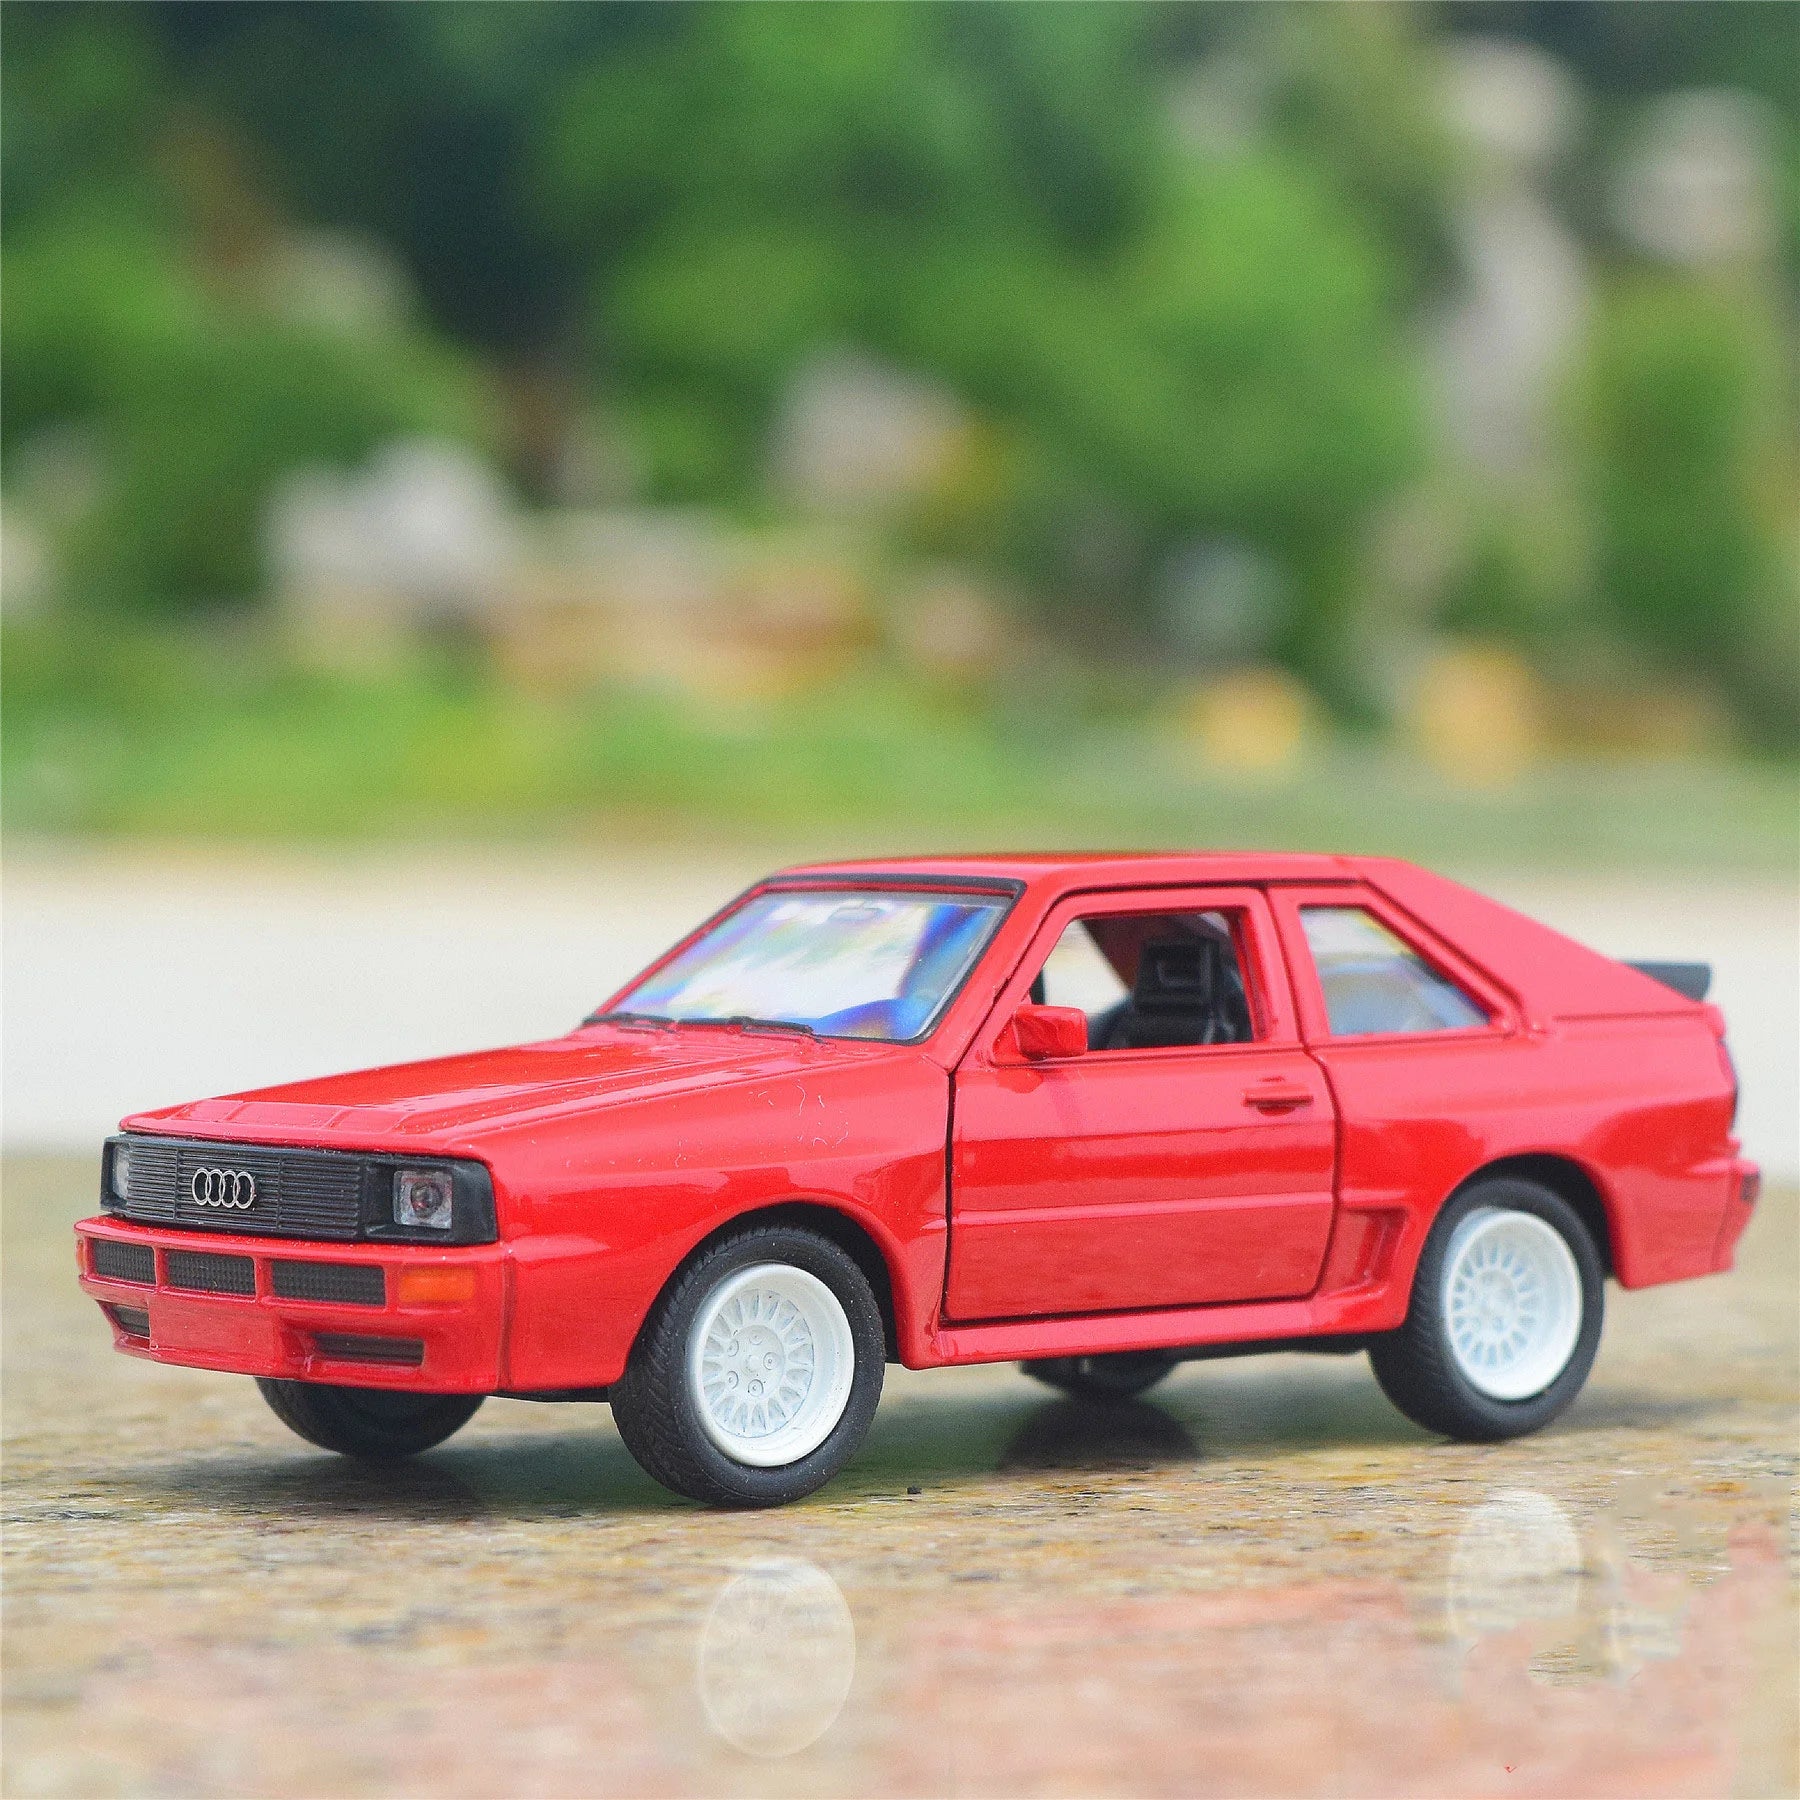 WELLY 1:36 Audi Sport Quattro Alloy Car Model Diecasts Metal Toy Miniature Scale Car Model High Simulation Pull Back Kids Gifts Red - IHavePaws